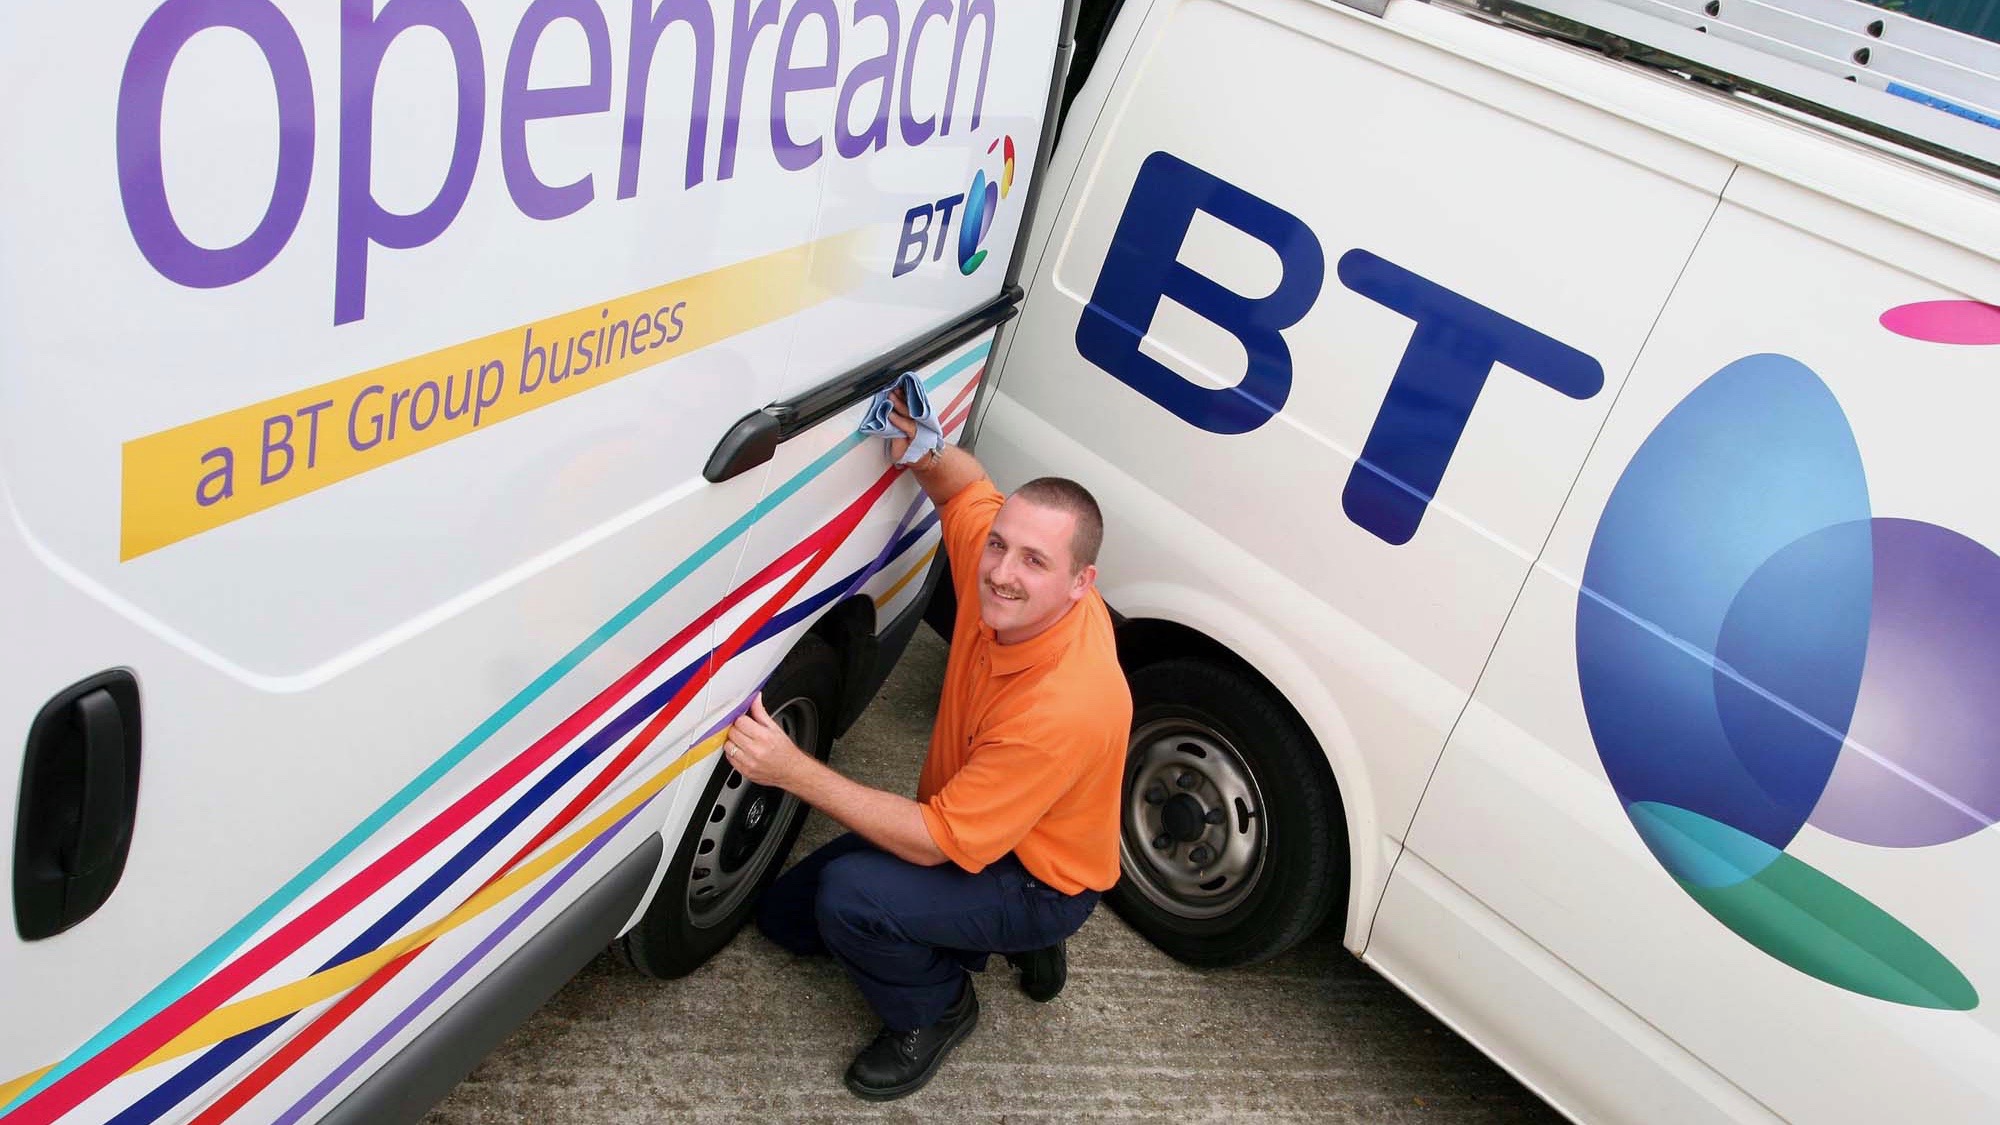 What Is Bt Openreach Everything You Need To Know Techradar